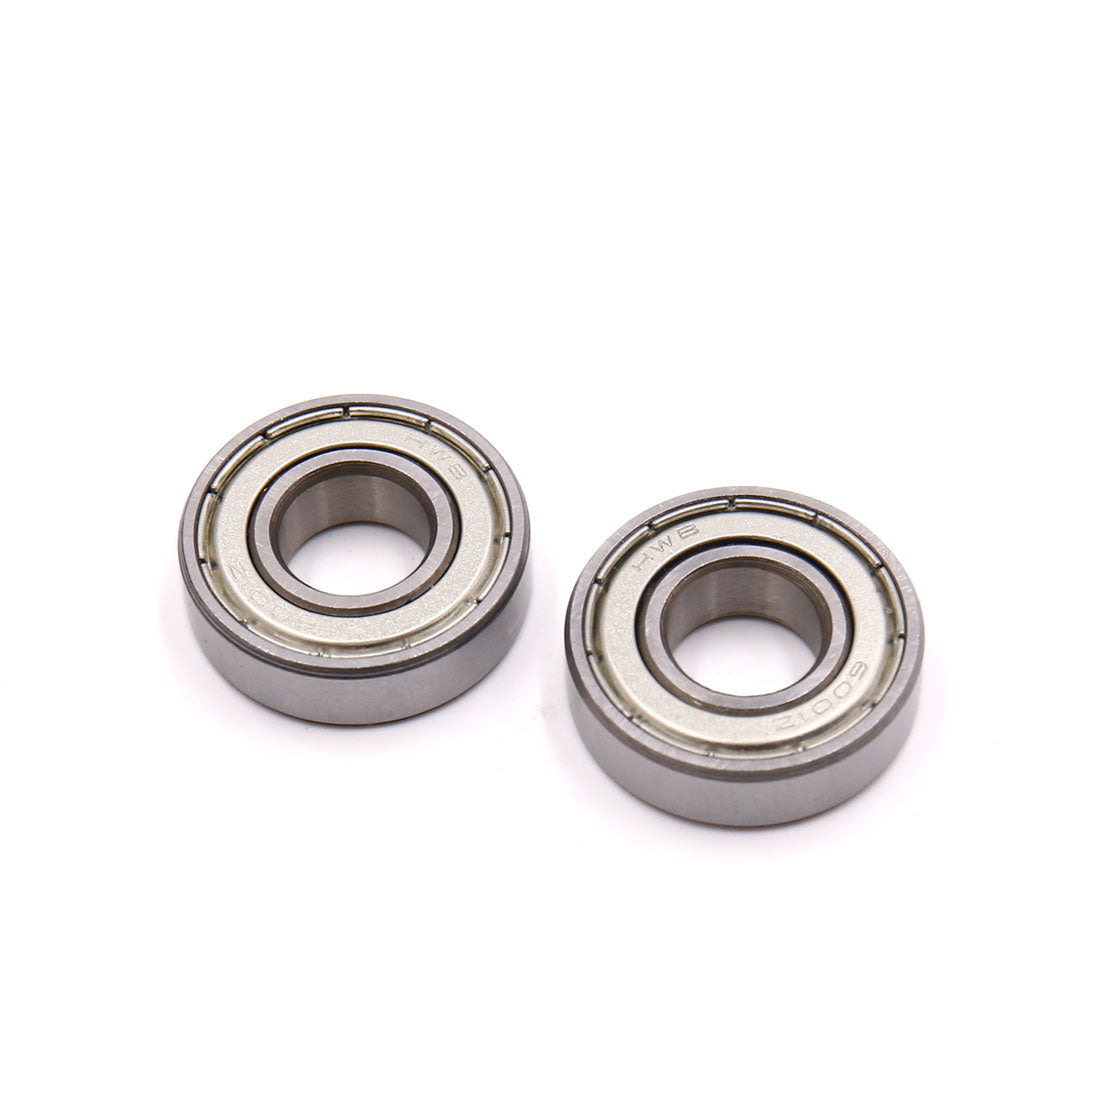 uxcell Uxcell 2Pcs 6001Z Stainless Steel Motorcycle Deep Groove Radial Ball Bearing 28 x 12 x 8mm